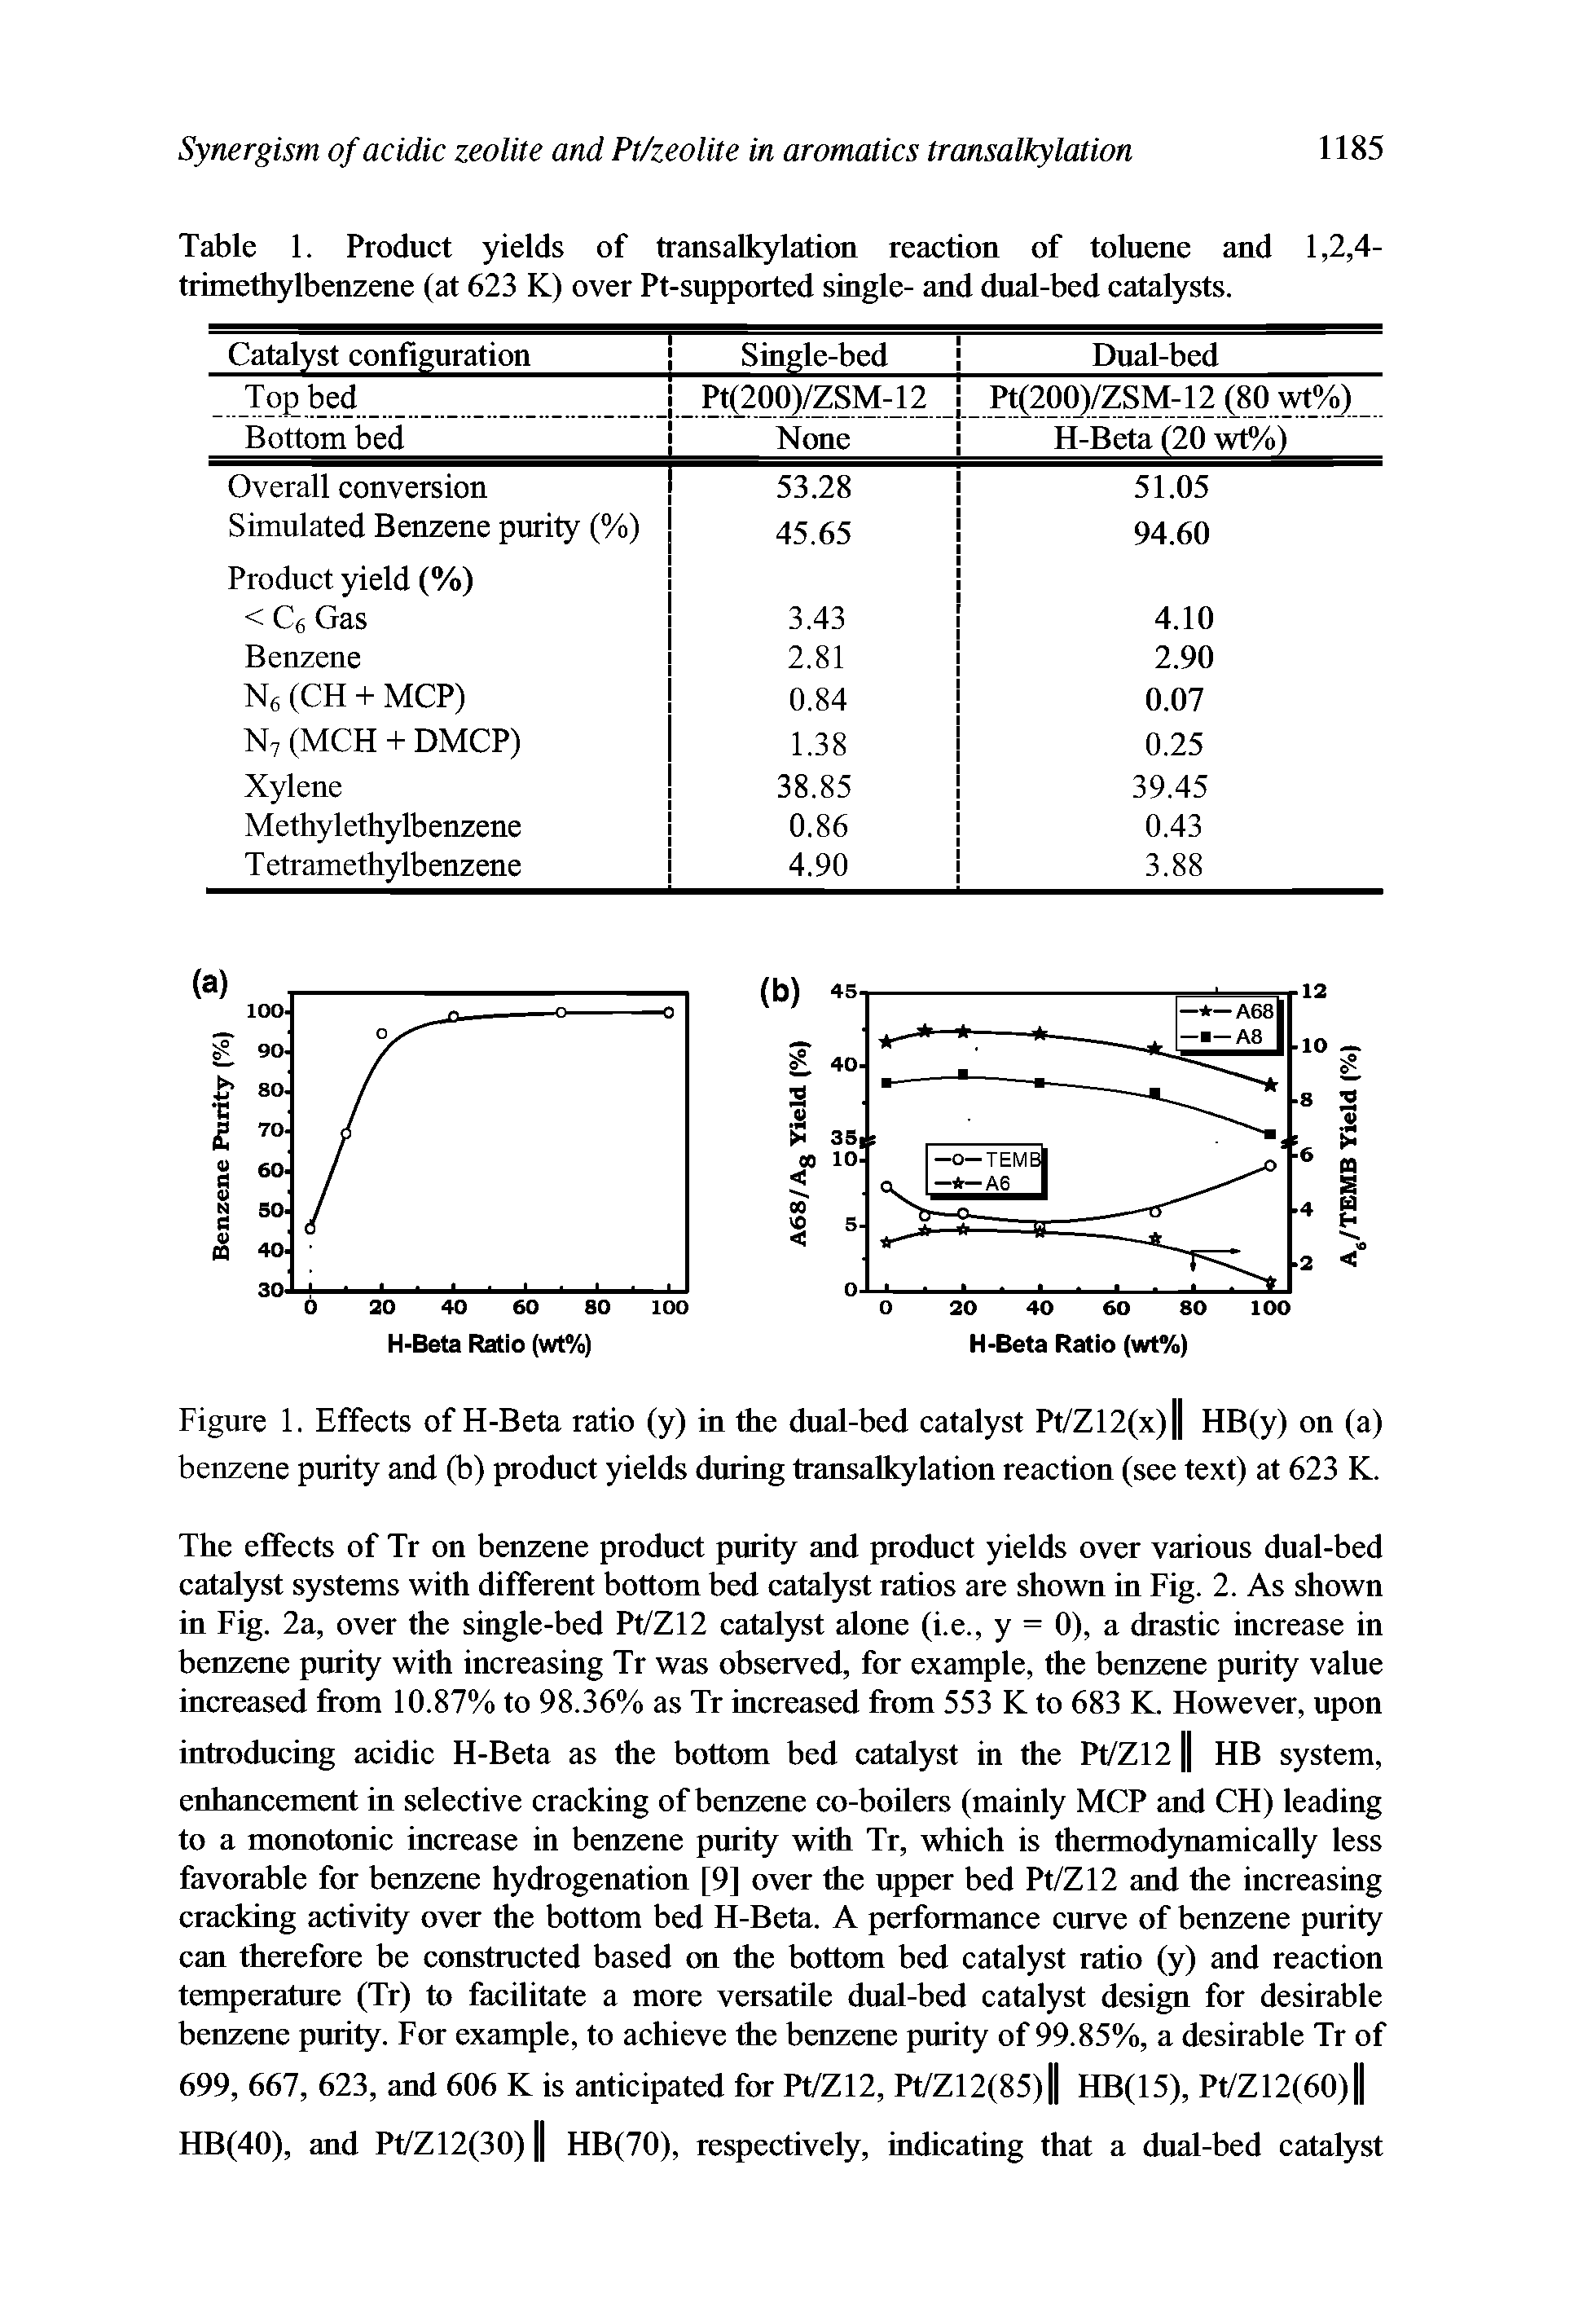 Table 1. Product yields of transalkylation reaction of toluene and 1,2,4-trimethylbenzene (at 623 K) over Pt-supported single- and dual-bed catalysts.